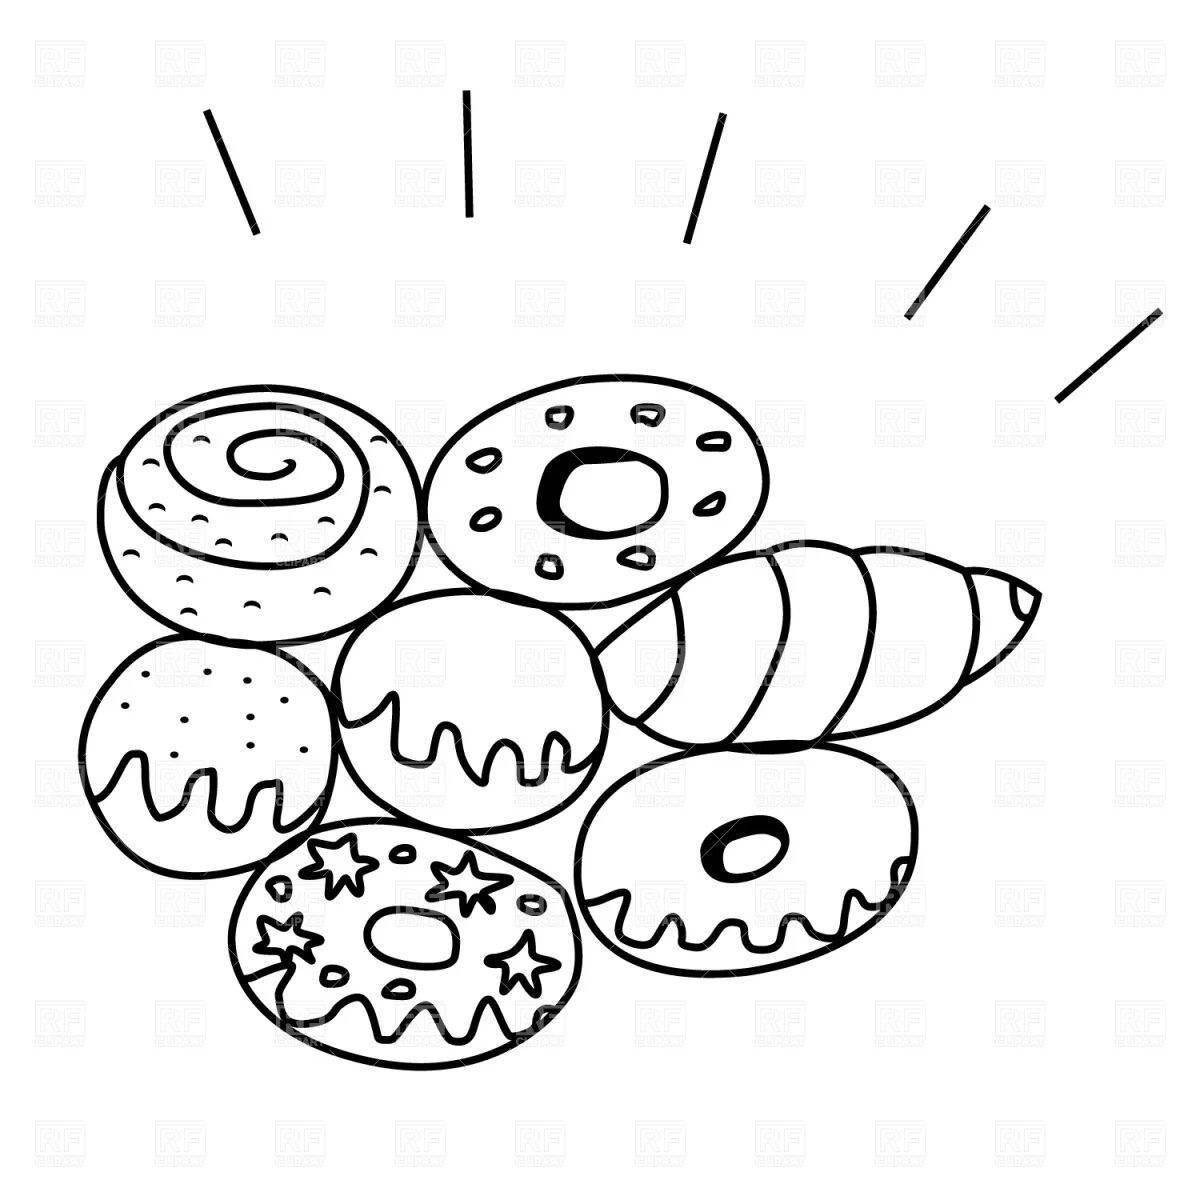 Glorious tasty and point coloring page